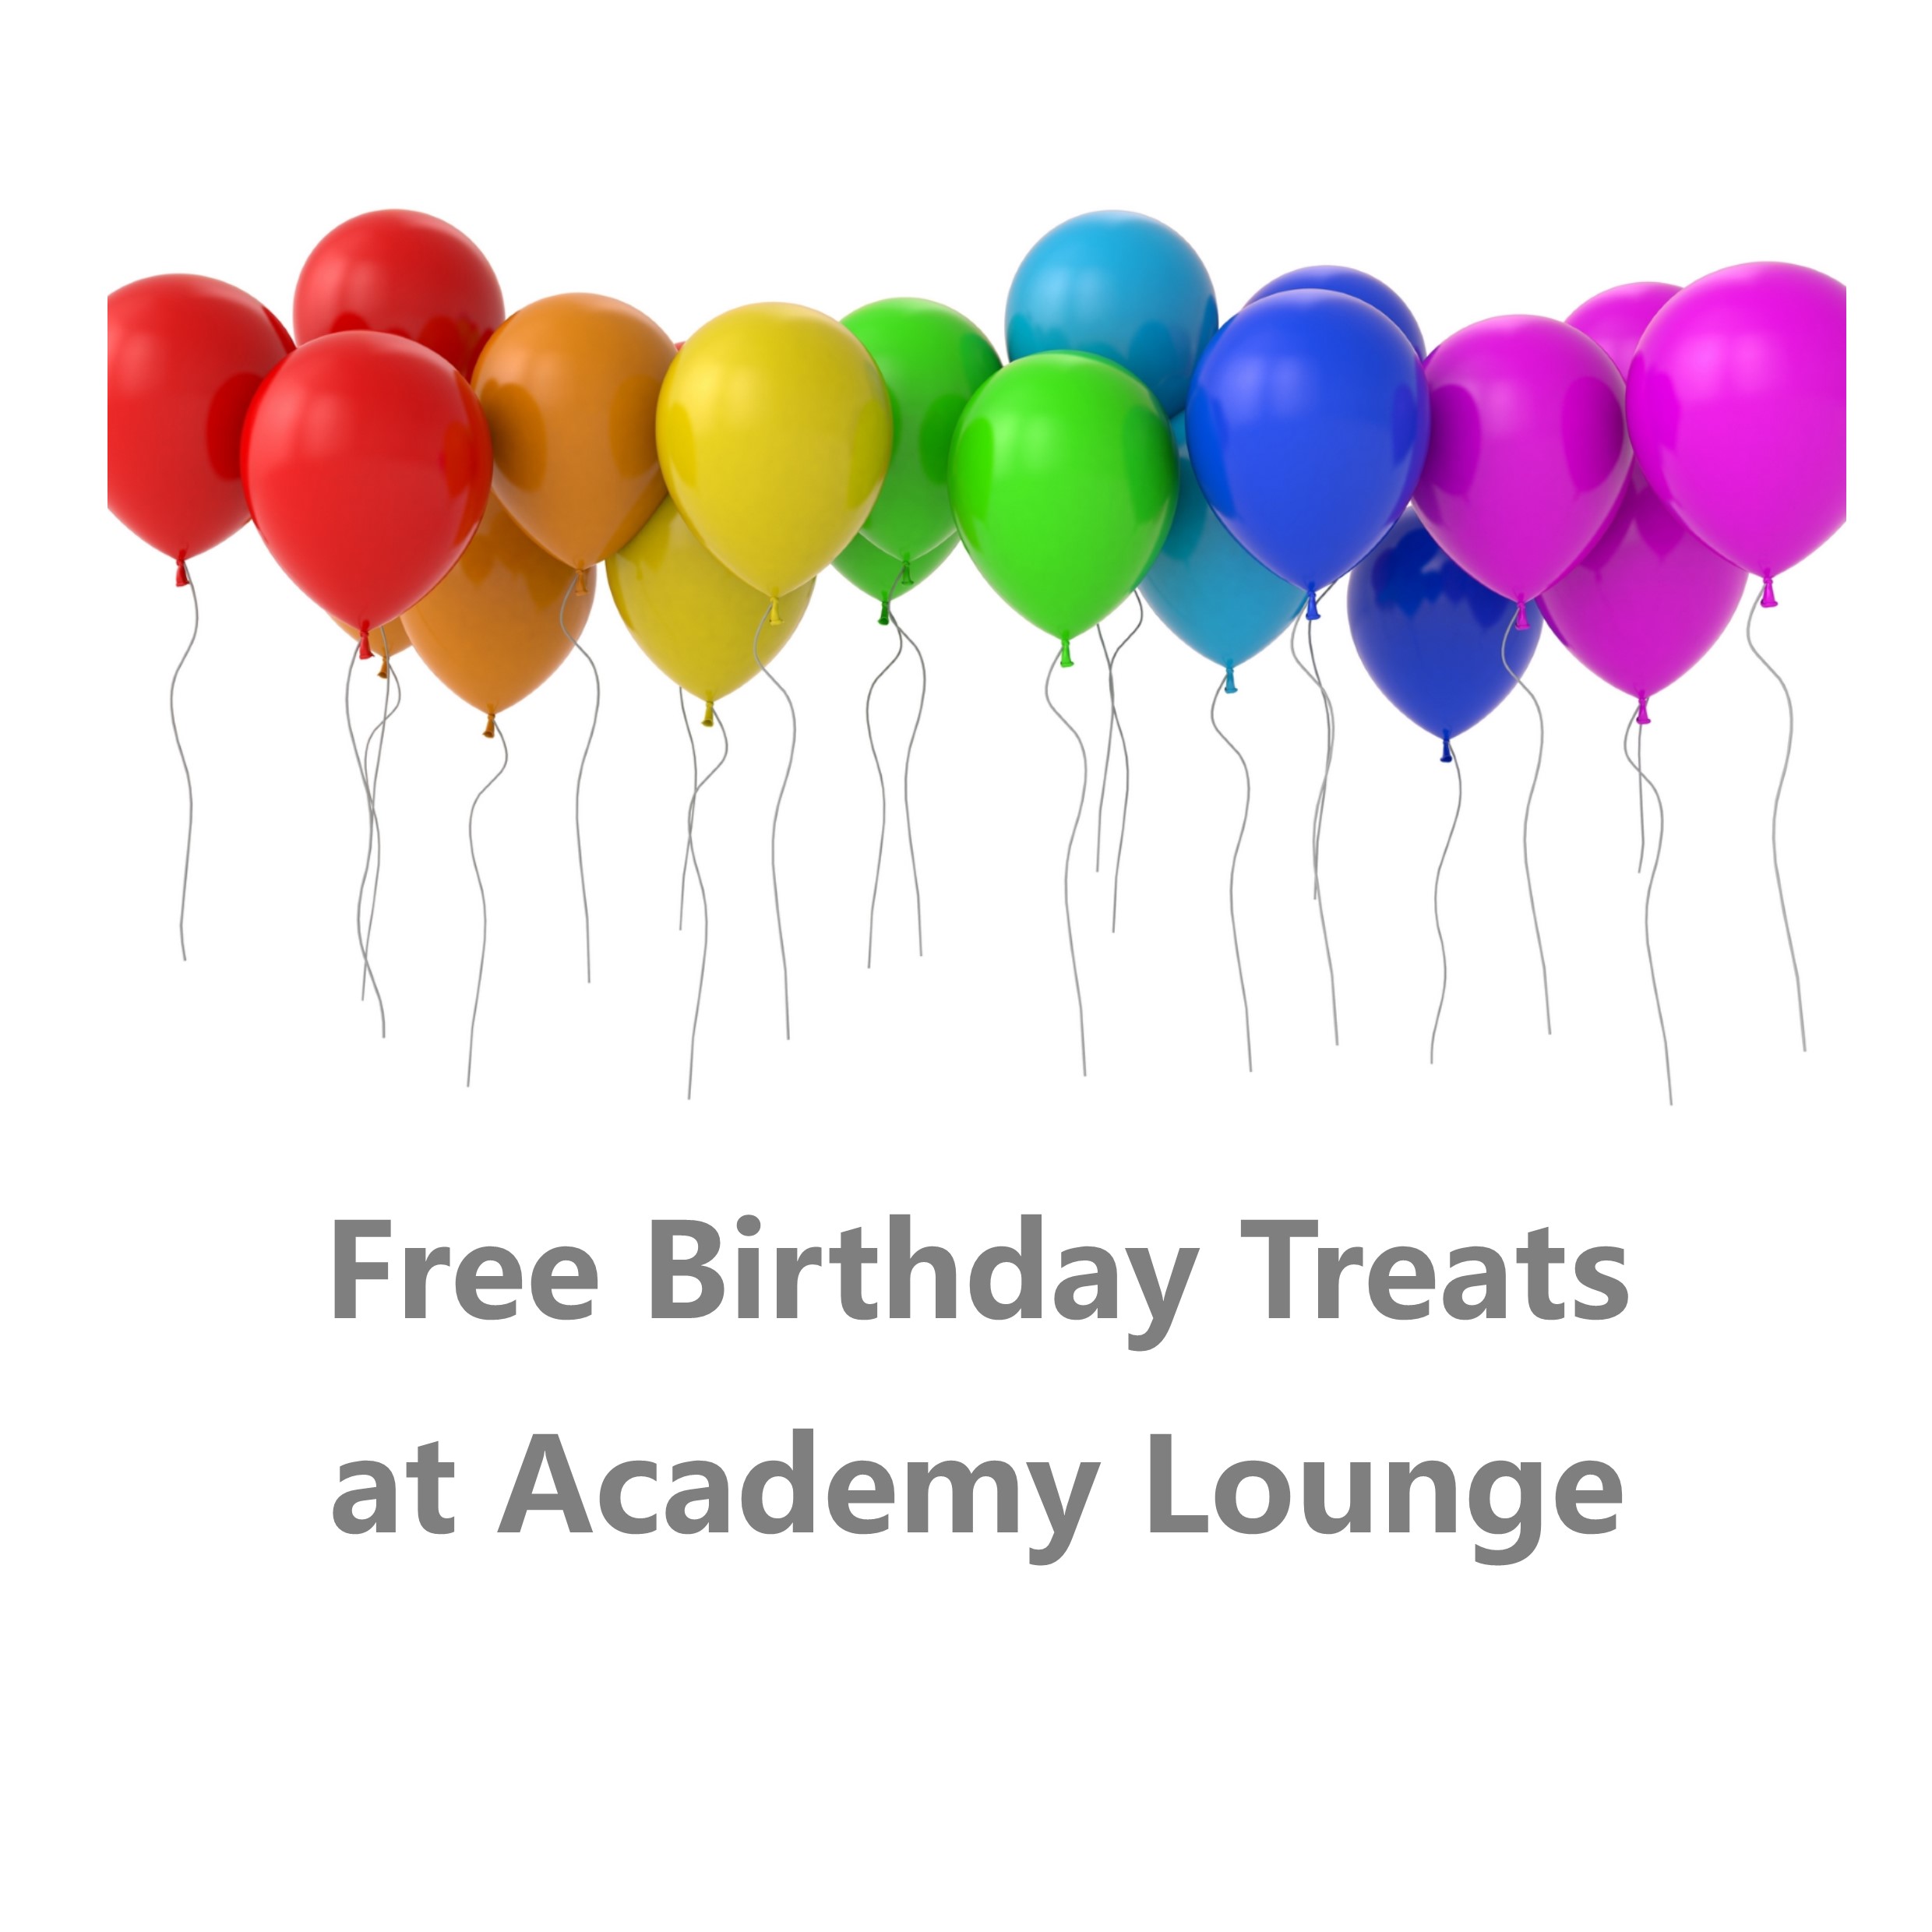 Get Birthday Treats at the Academy Lounge